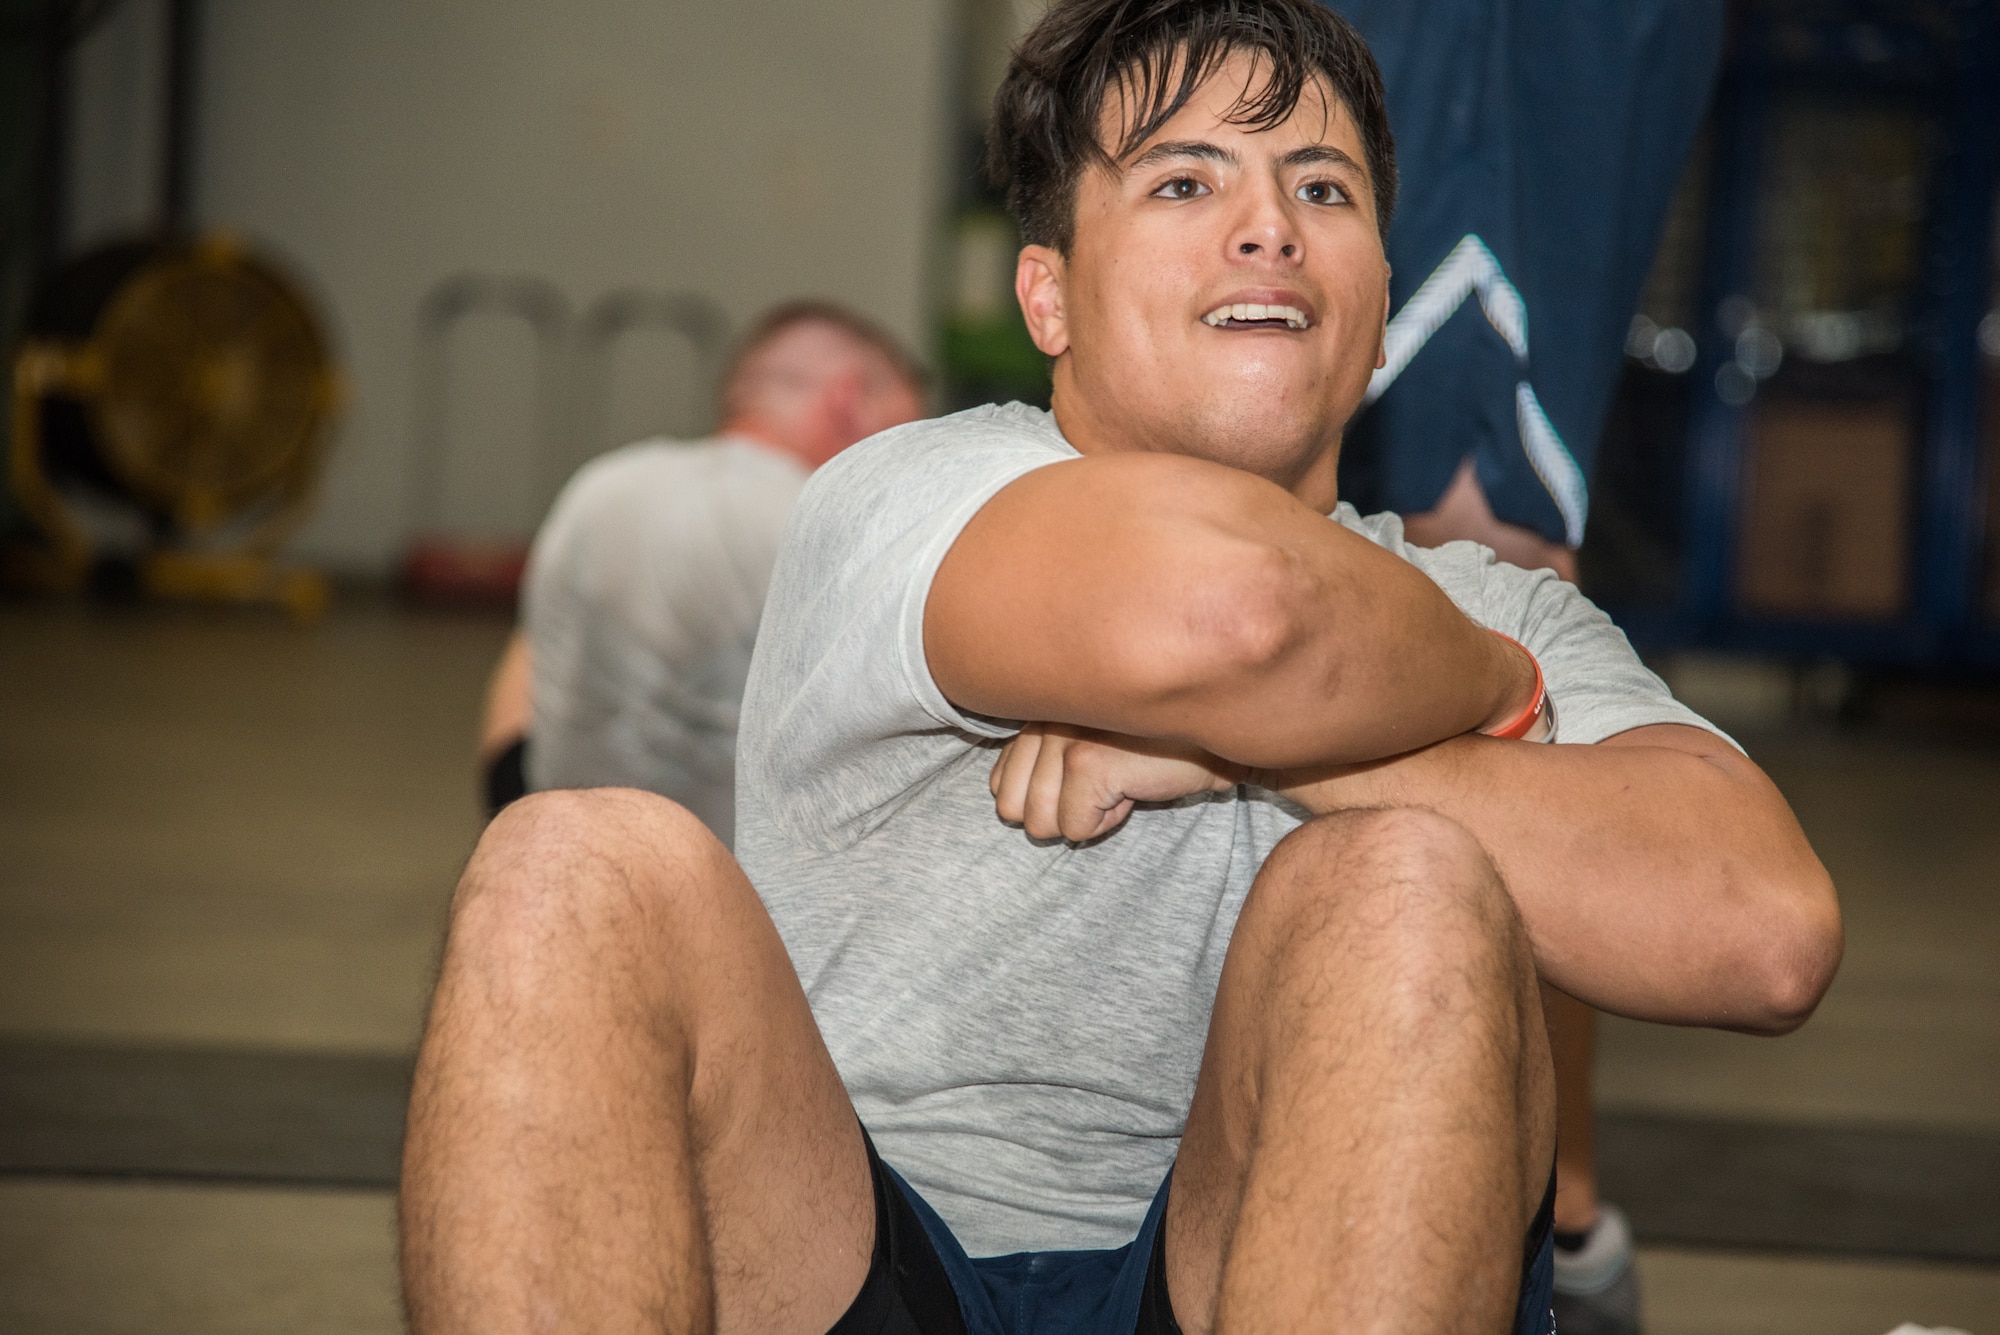 Senior Airman Kevin Kohan, an 11th Civil Engineer Squadron Explosive Ordnance Disposal journeyman at Joint Base Andrews, Md., performs the Extended Cross Knee Crunch Metronome of the EOD Tier 2 Physical Fitness Test Prototype at Dover Air Force Base, Del., Aug. 8, 2018. Kohan was one of more than 20 Airmen to participate in the EOD Tier 2 test prototype development. (U.S. Air Force photo by Staff Sgt. Damien Taylor)